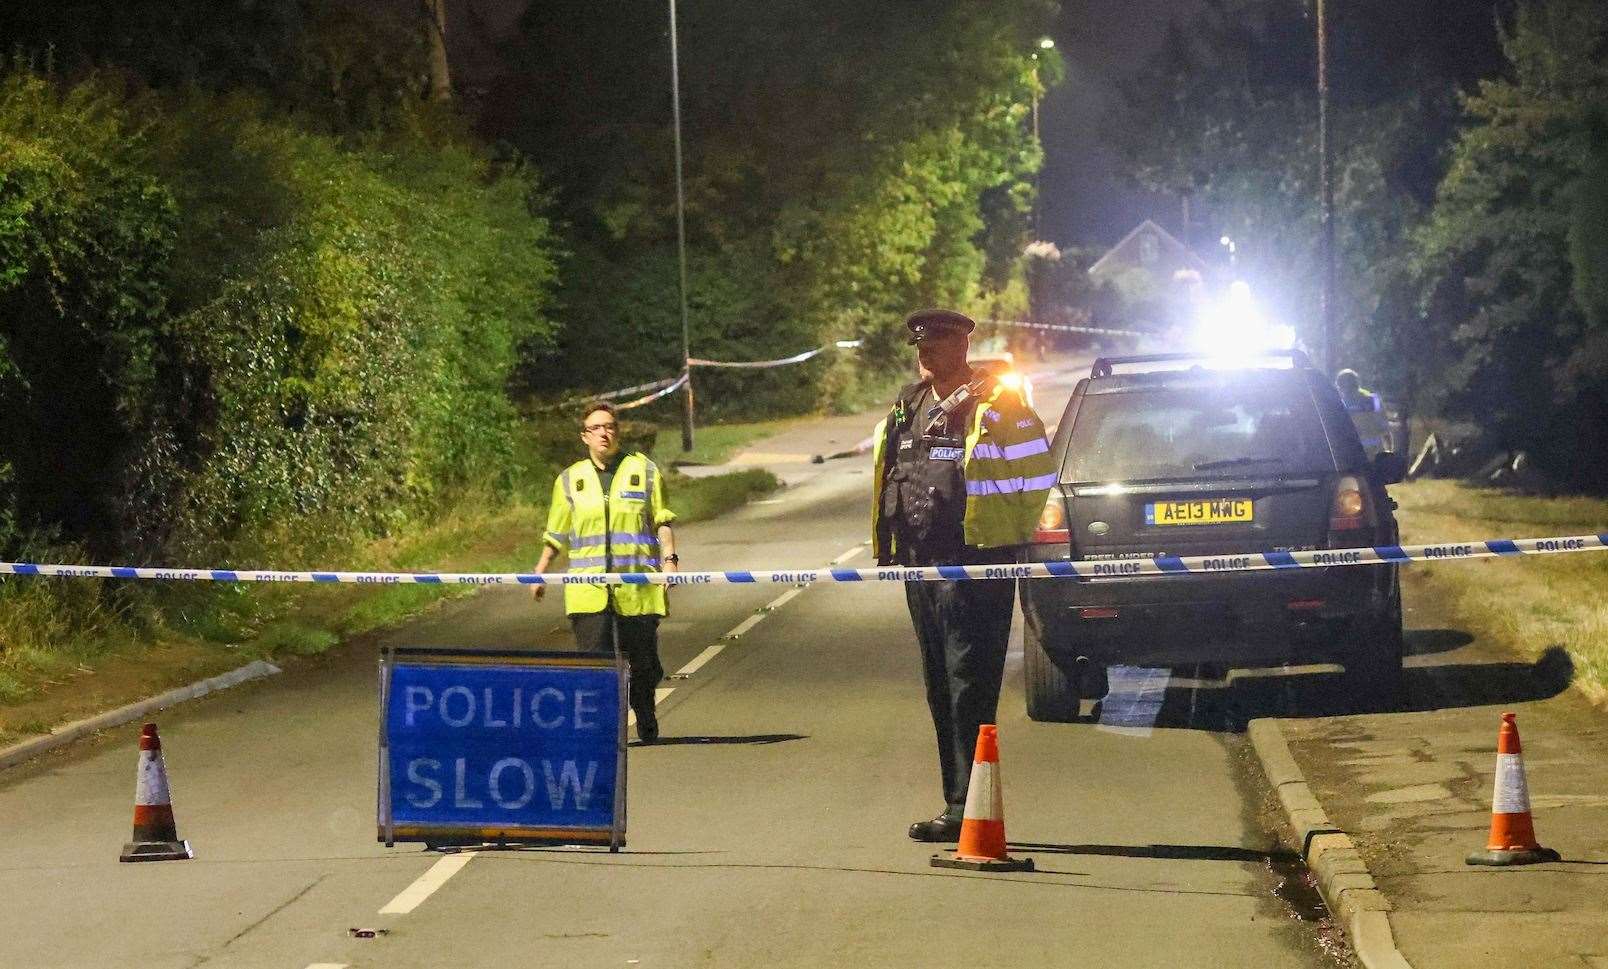 The incident in Coxheath, near Maidstone, happened at about 10pm last night